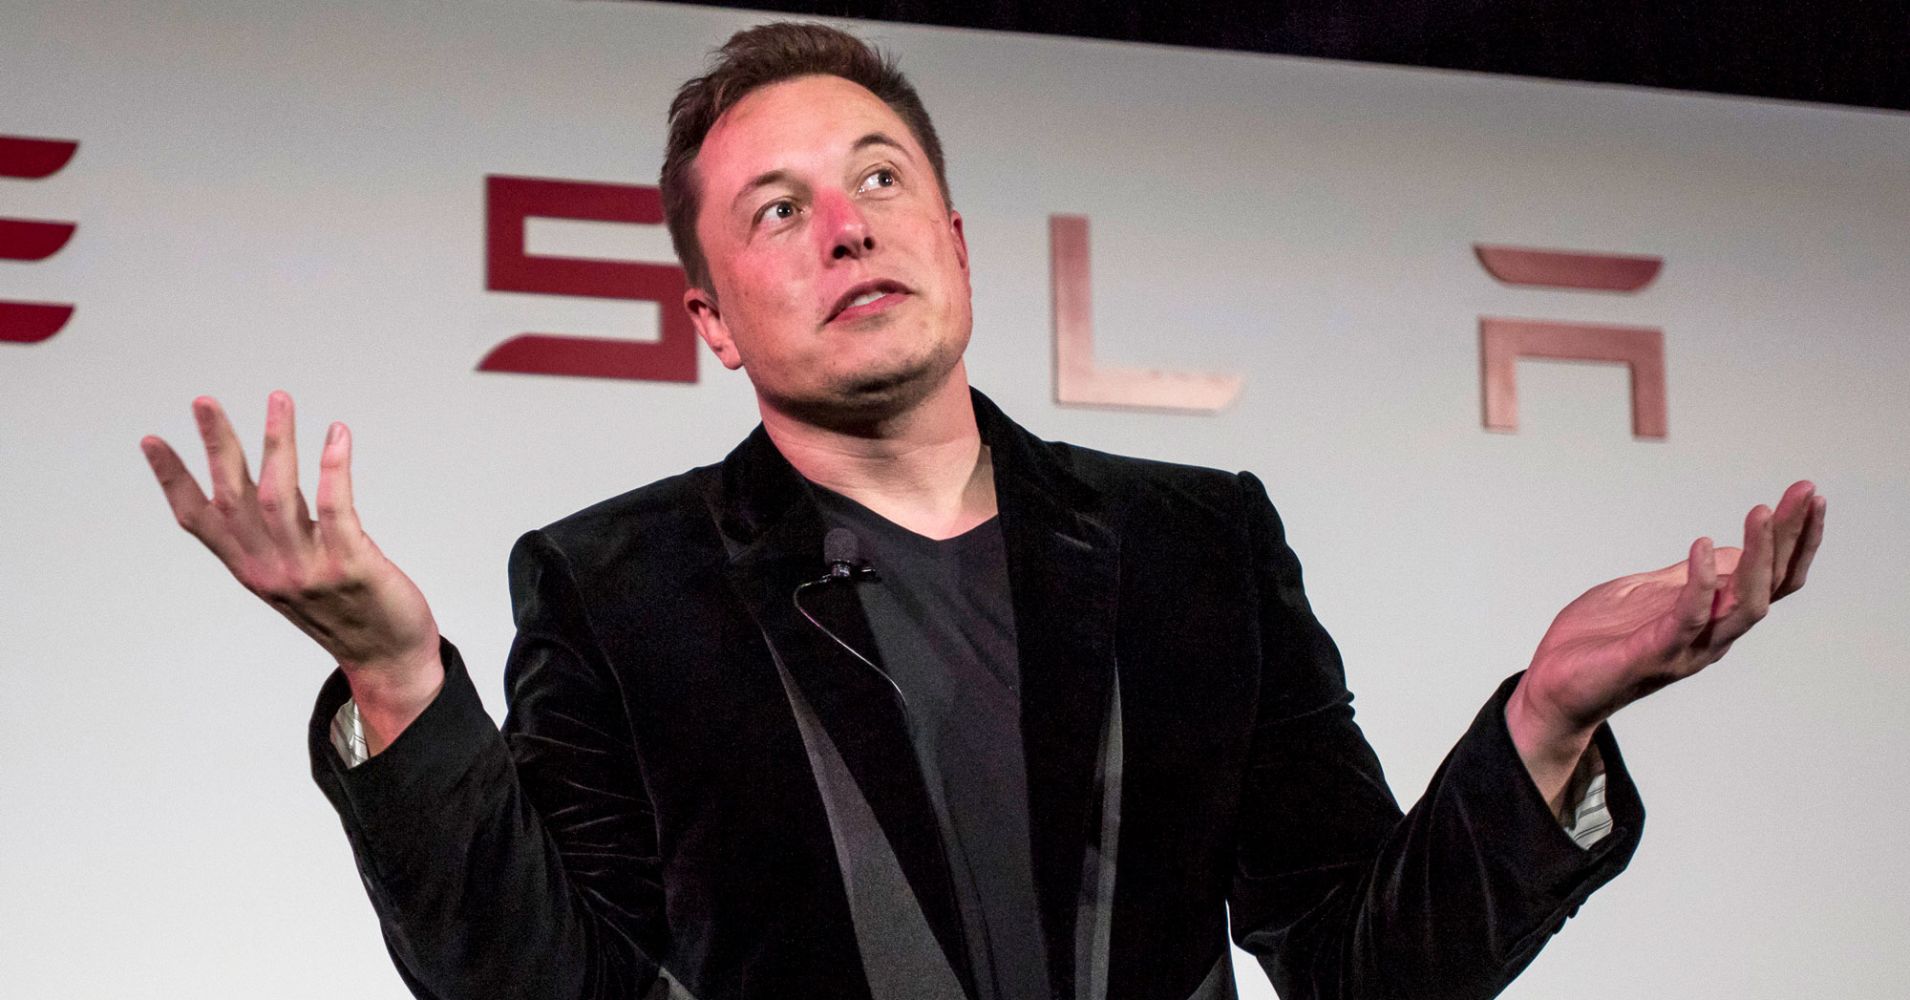 Elon Musk may be held in contempt of court over this tweet